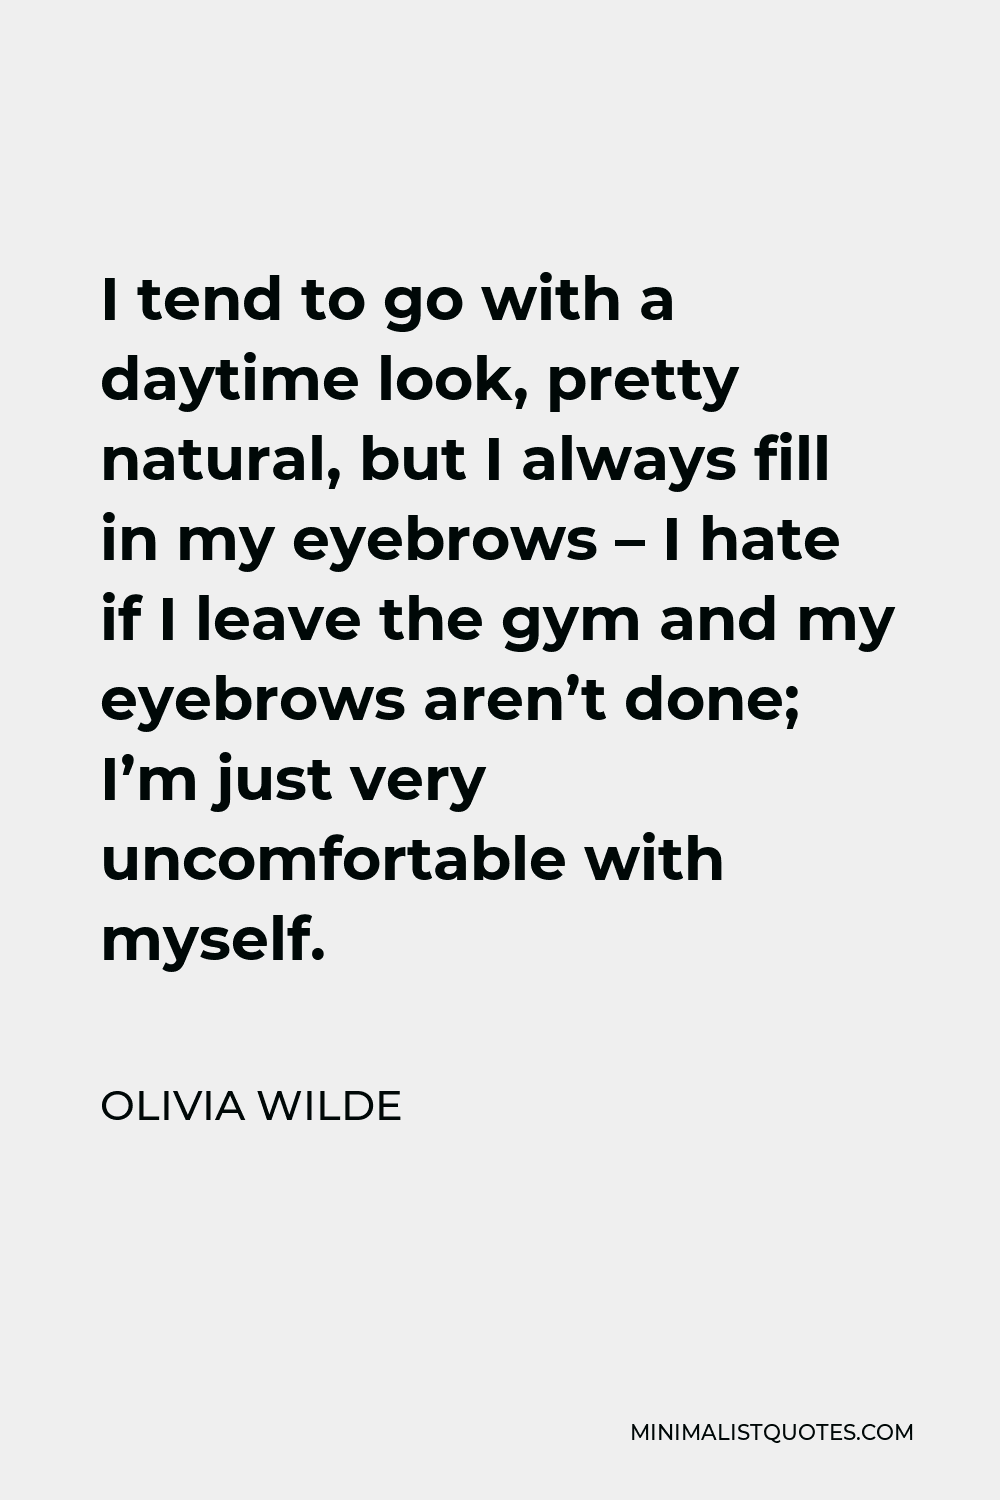 Olivia Wilde Quote - I tend to go with a daytime look, pretty natural, but I always fill in my eyebrows – I hate if I leave the gym and my eyebrows aren’t done; I’m just very uncomfortable with myself.